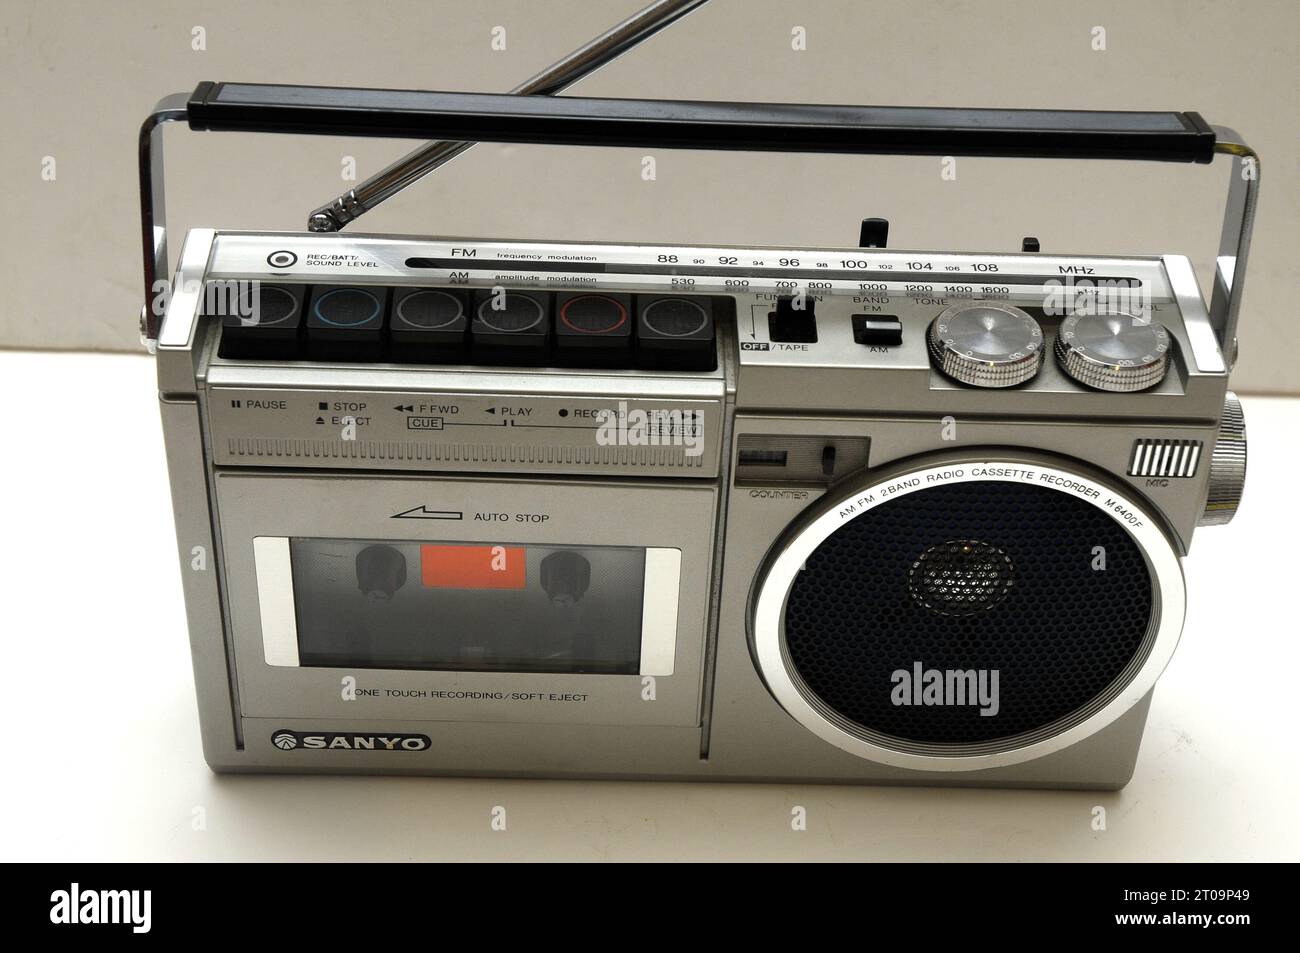 sanyo; cassette; 70s; music device; 70s music player; tape; cassette; Sanyo radio cassette; vintage radio cassette Stock Photo